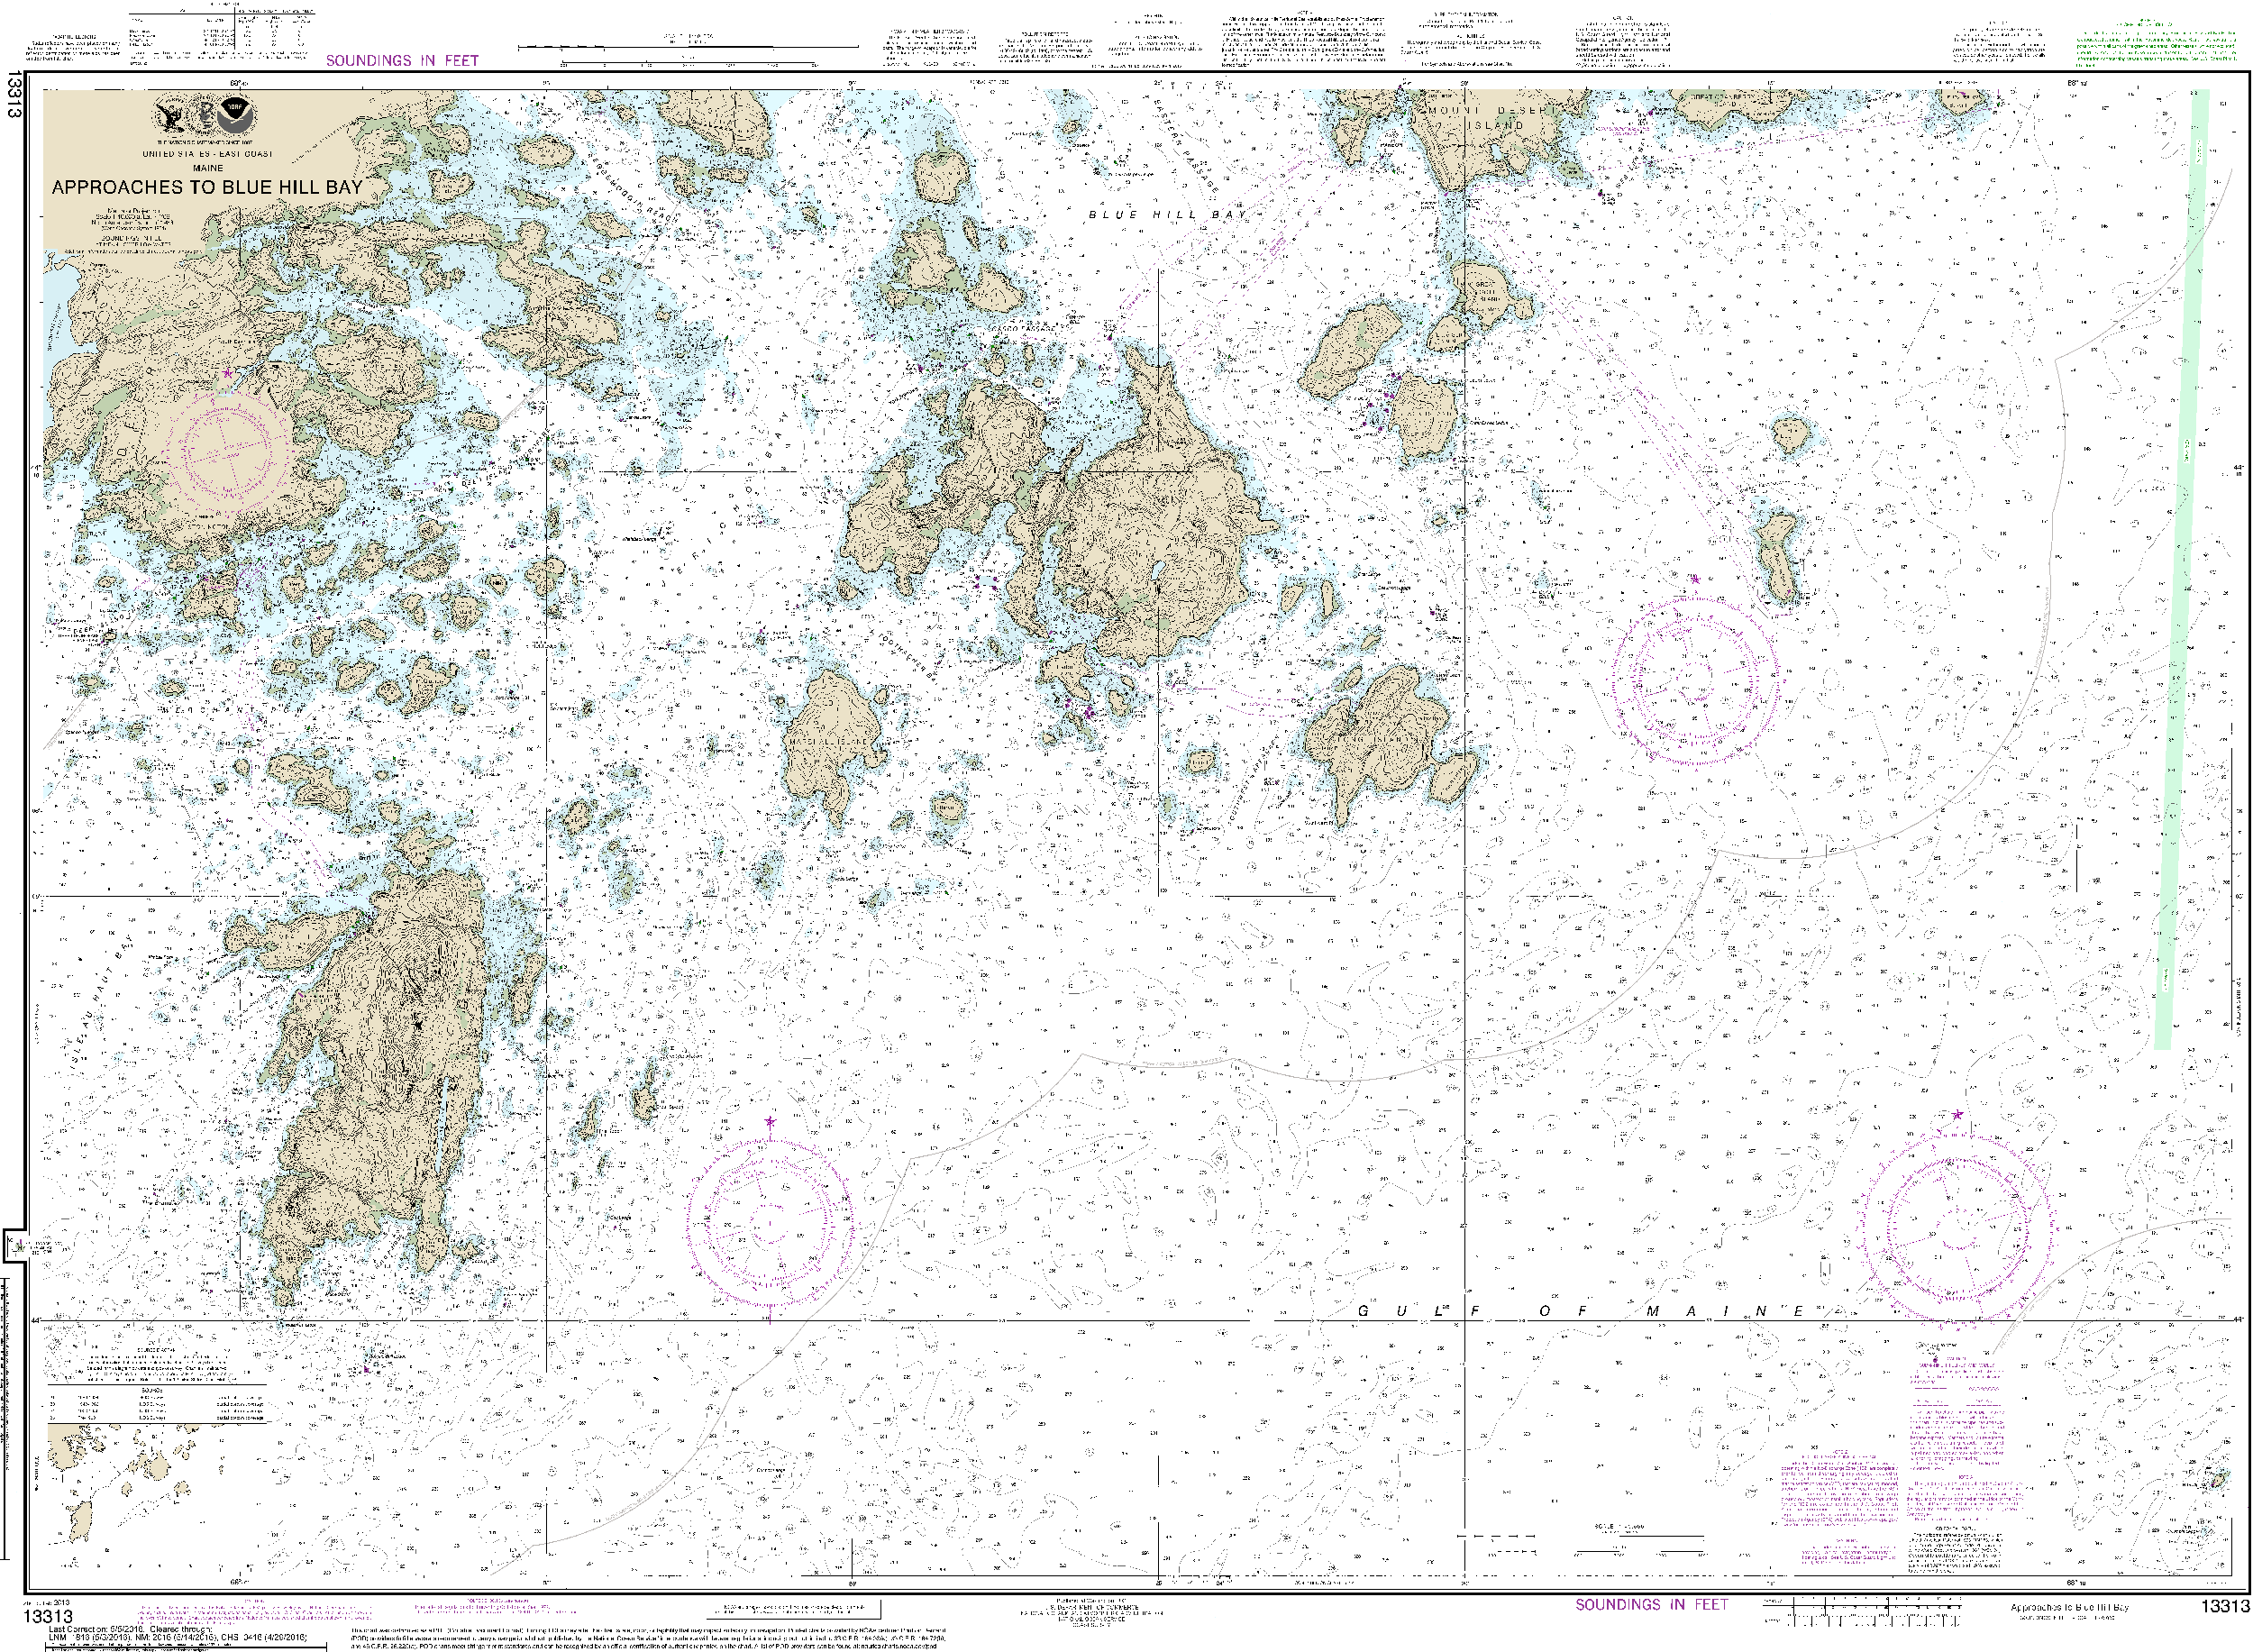 NOAA Nautical Chart 13313: Approaches to Blue Hill Bay